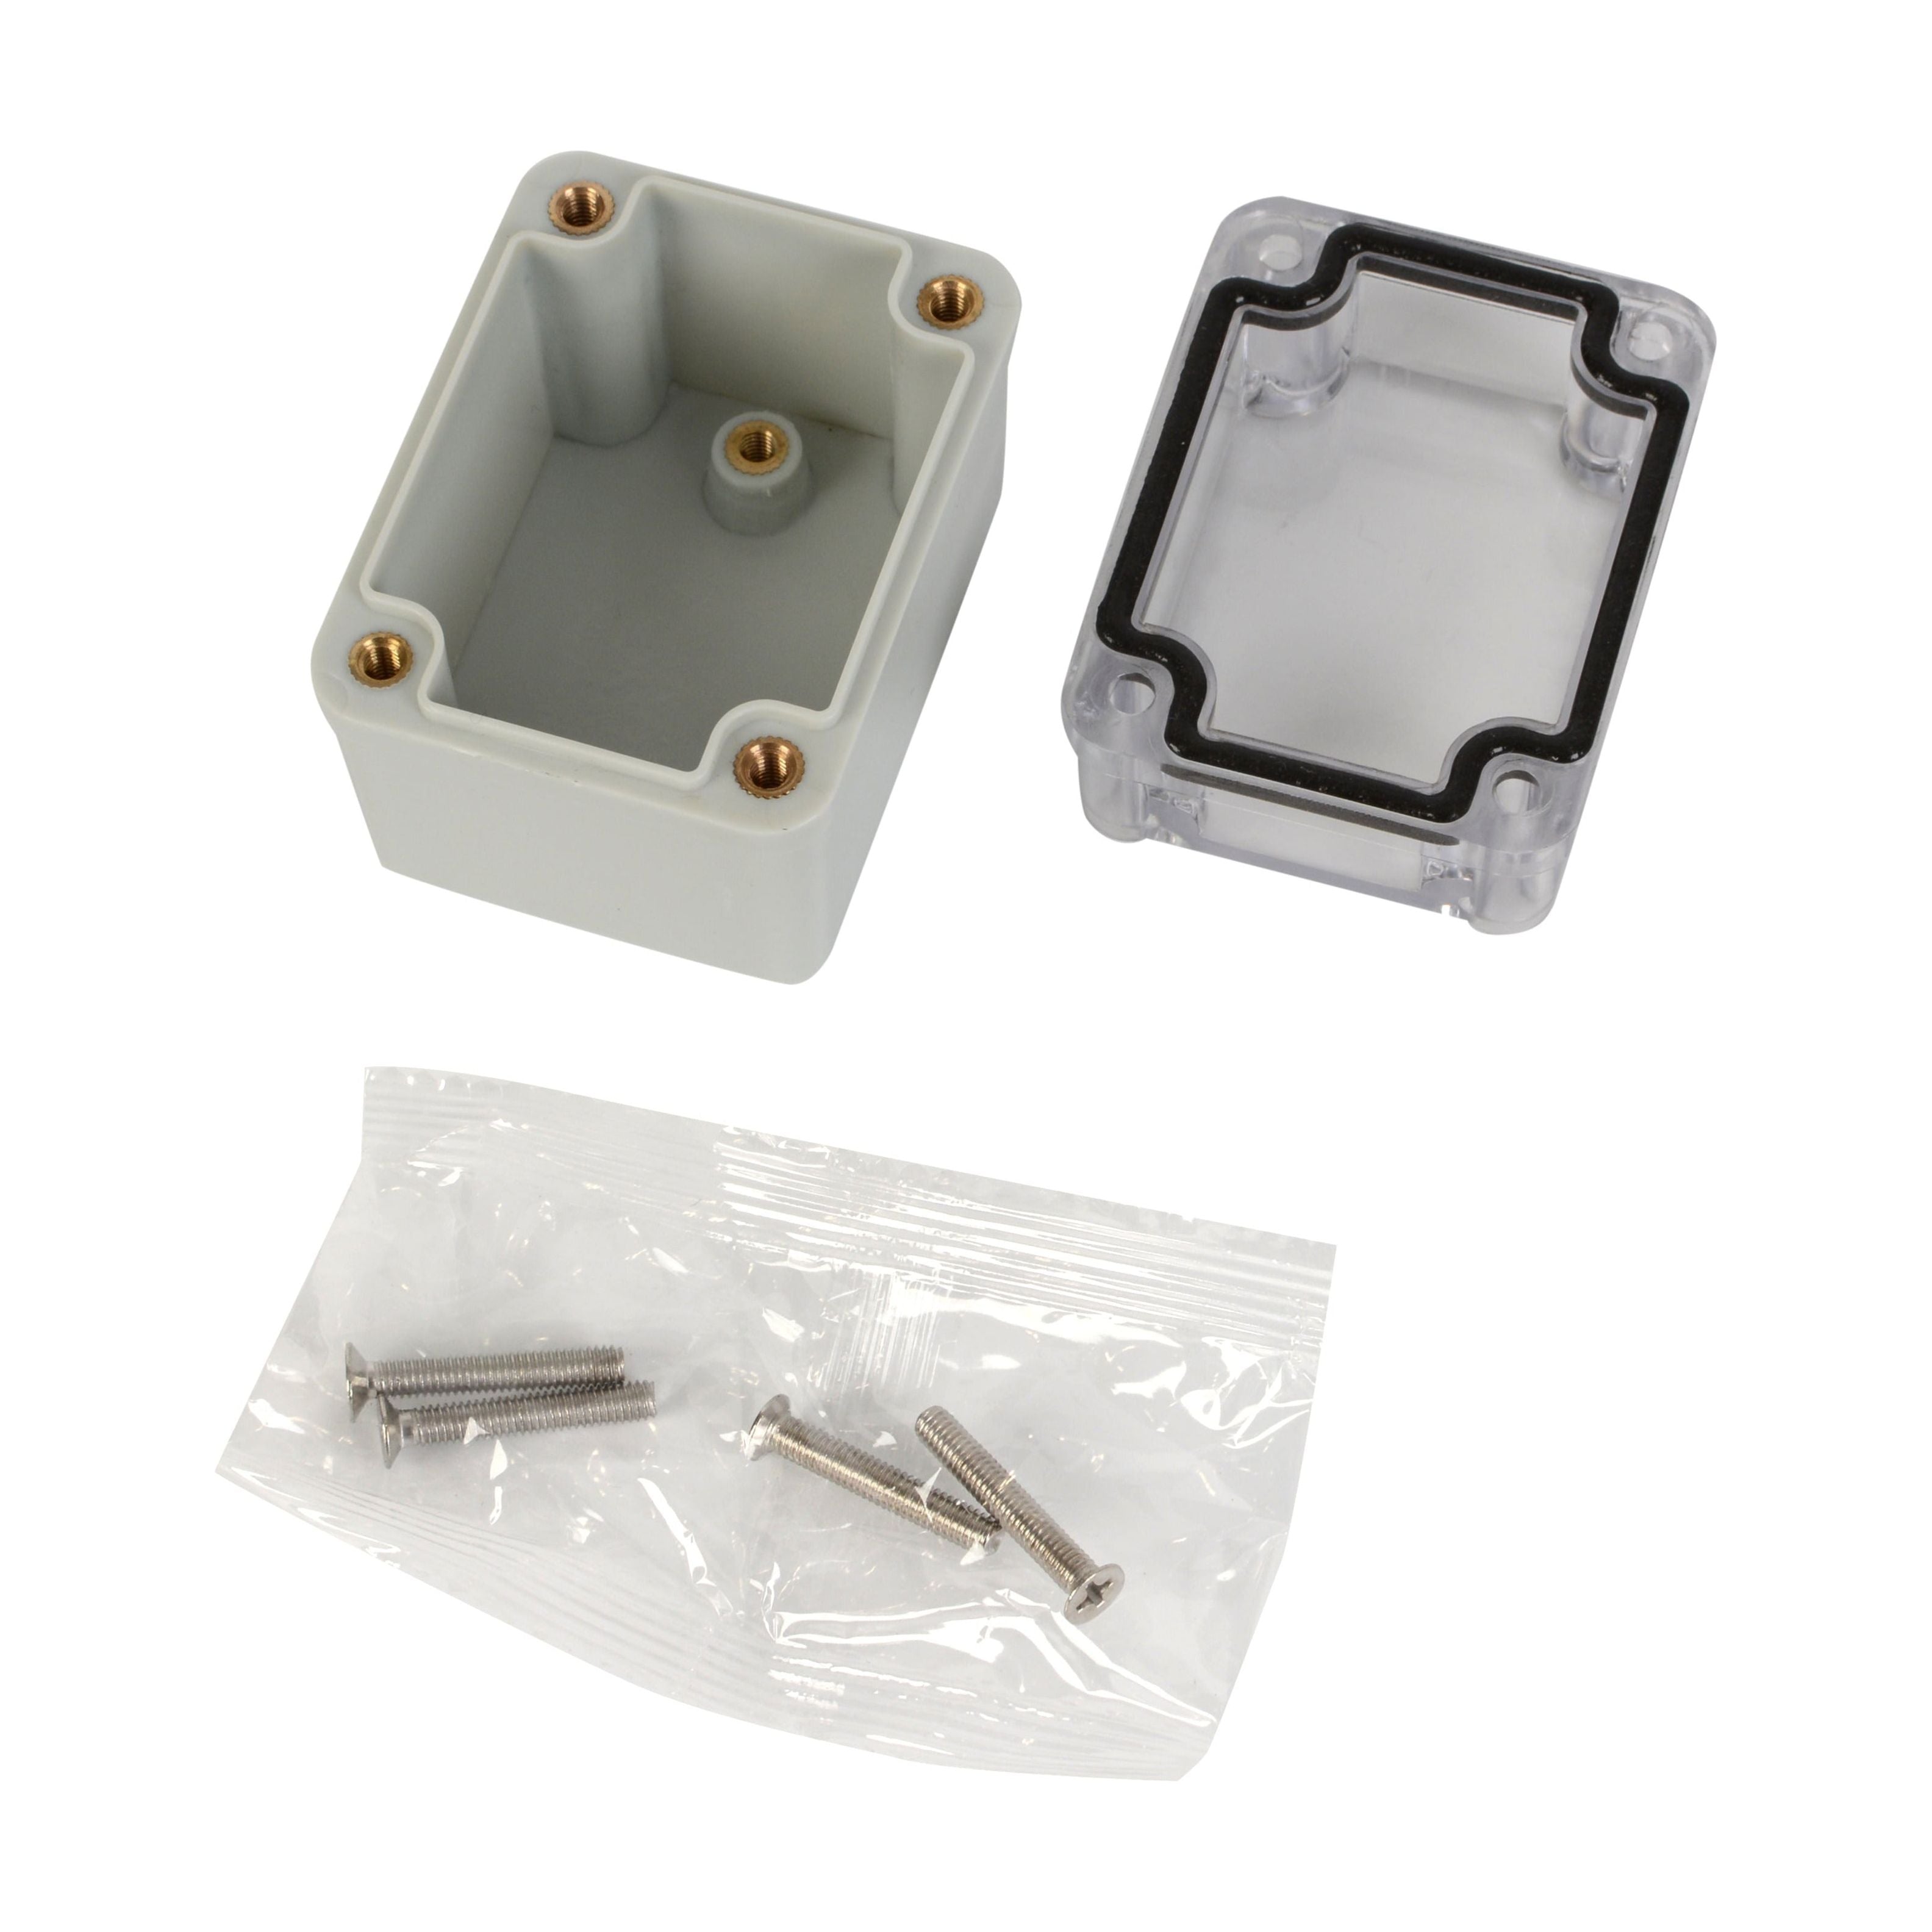 ABS IP66 Clear Lid Junction Box 50 x 65 x 55mm